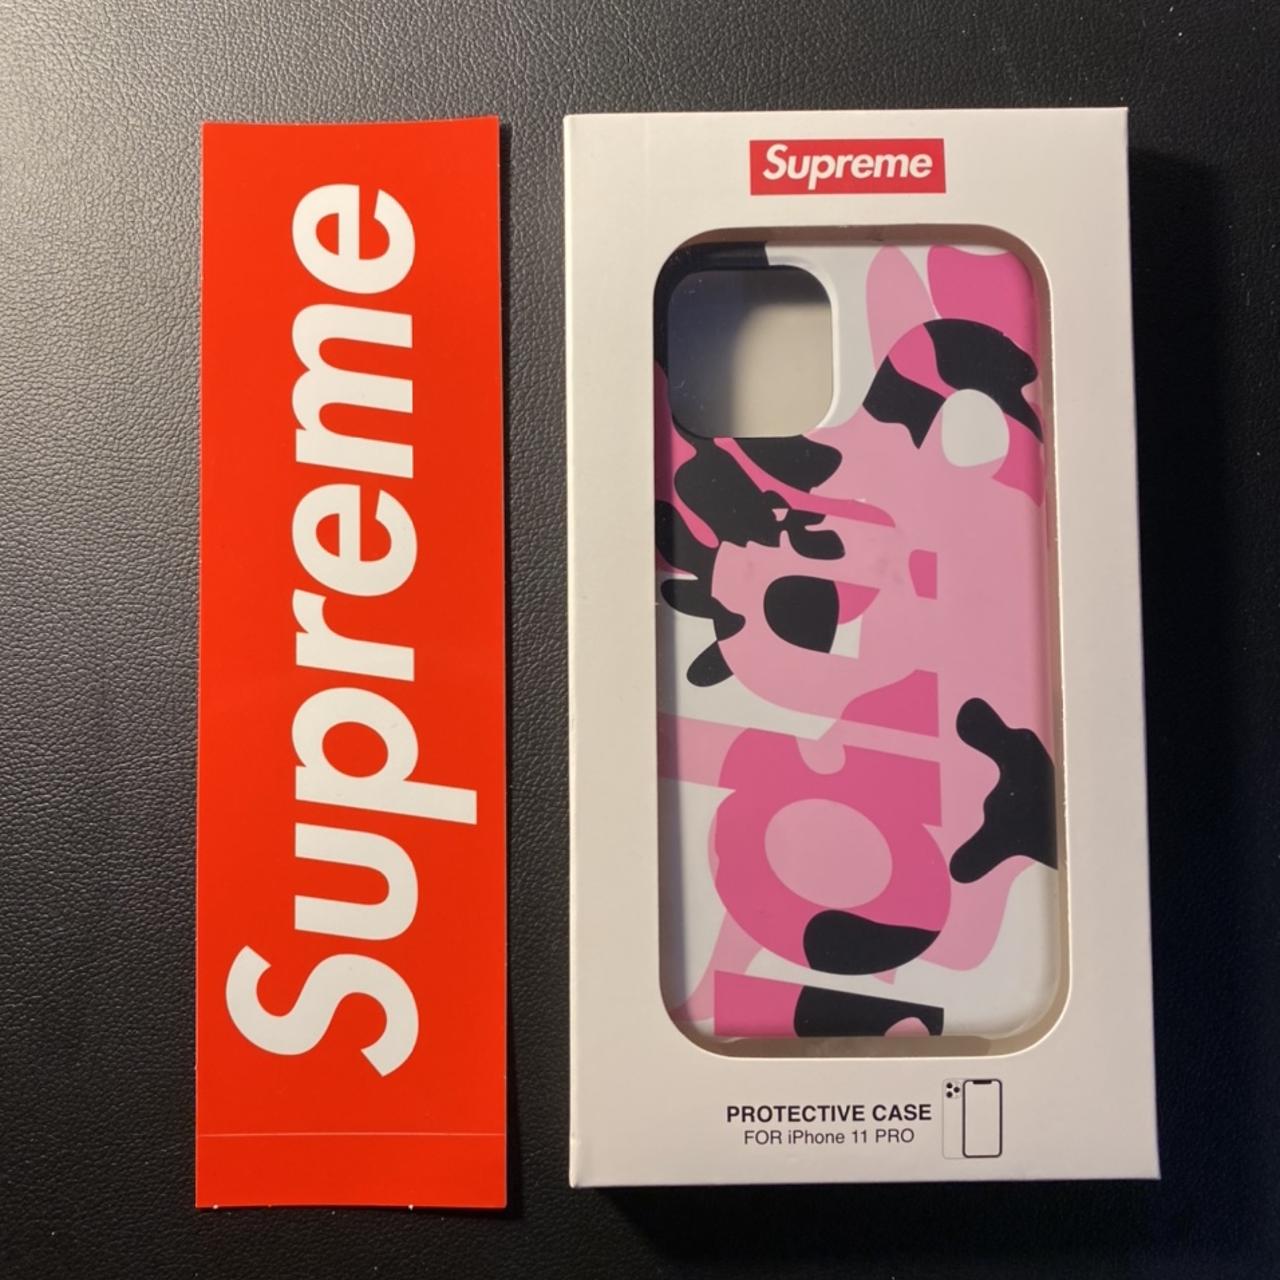 Buy Supreme Camo iPhone 11 Pro Case 'Pink Camo' - FW20A75B PINK